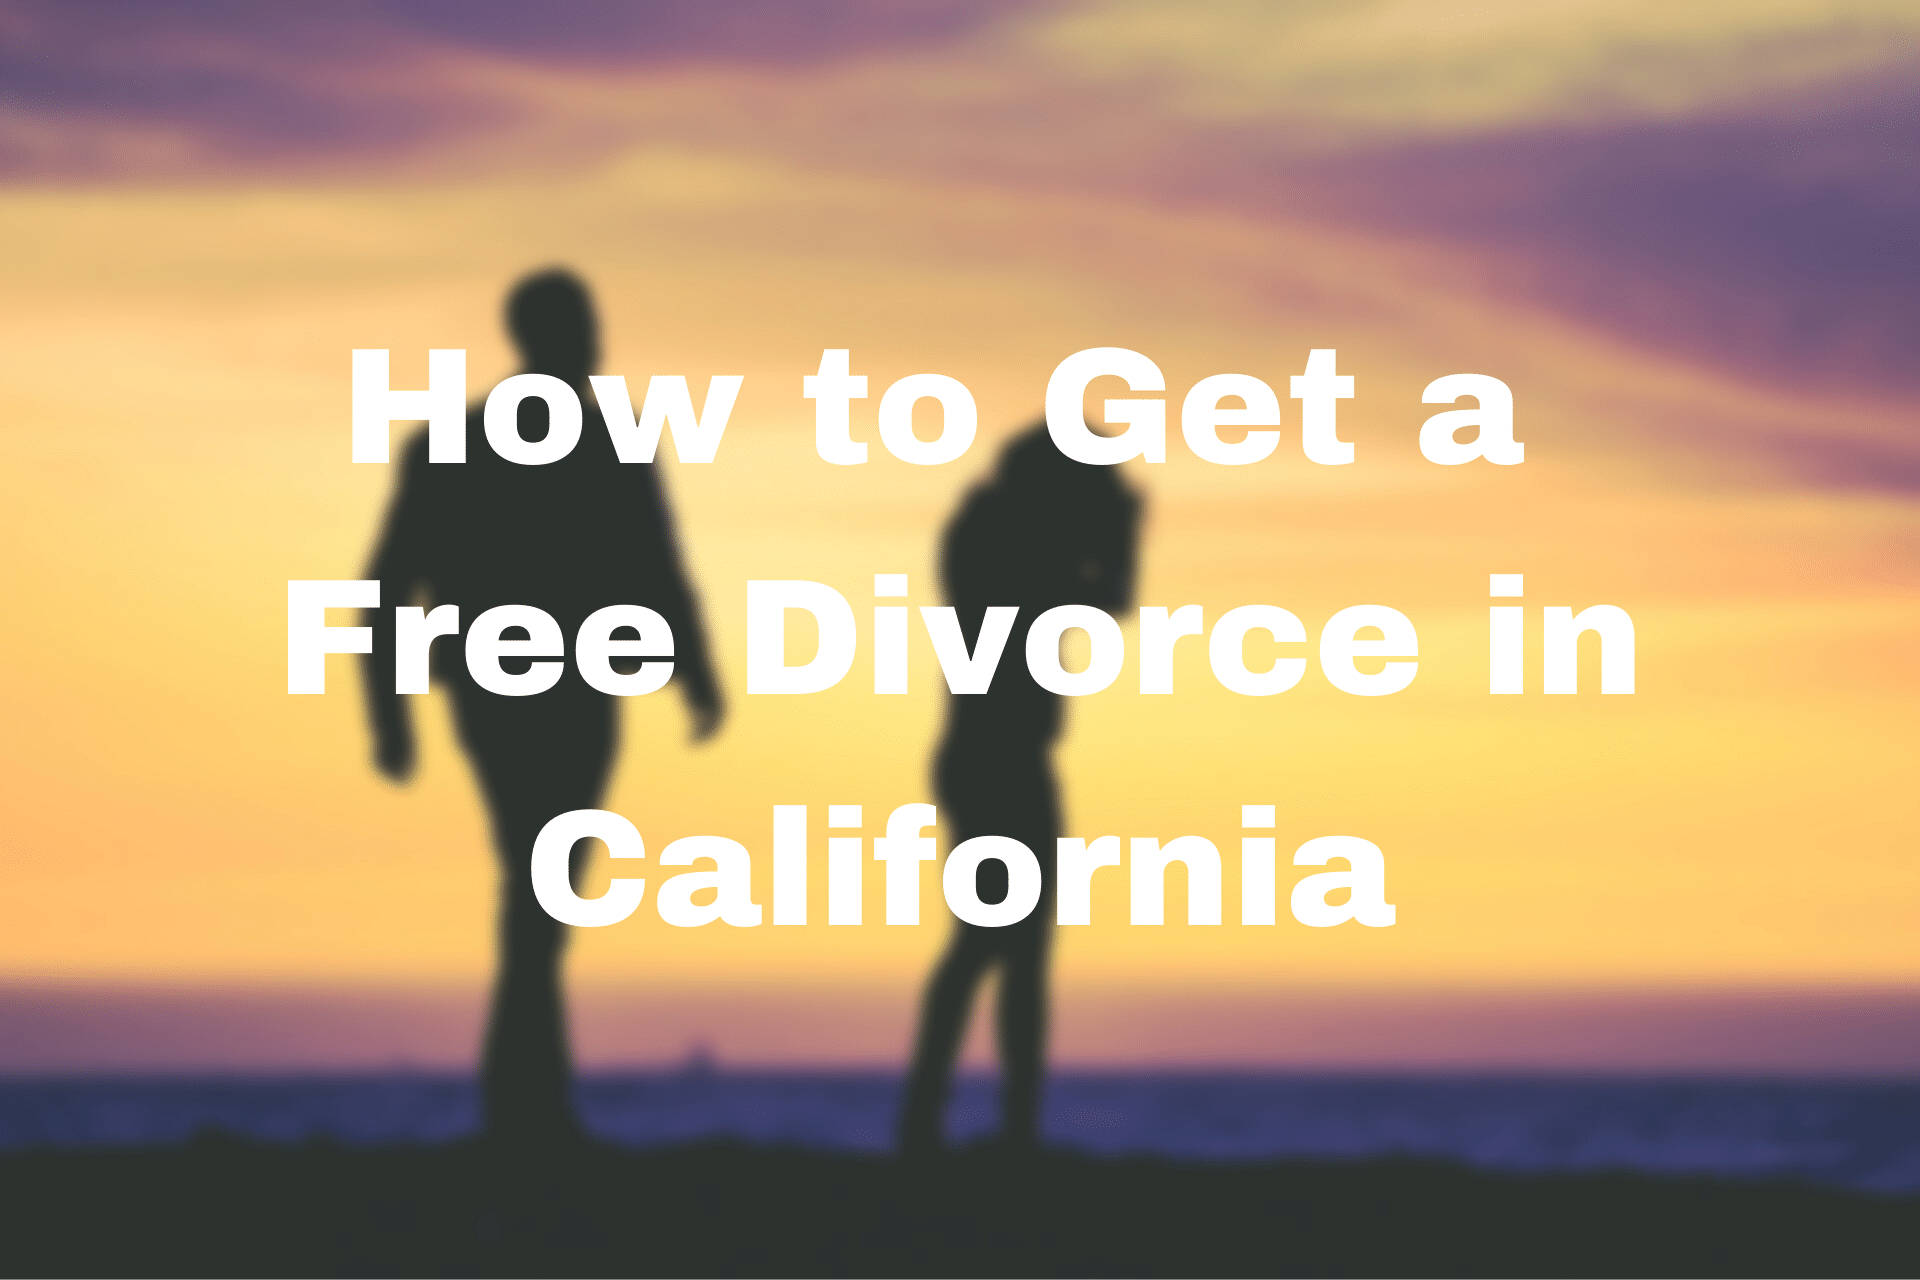 Stock image with text: "How to Get a Free Divorce in California"